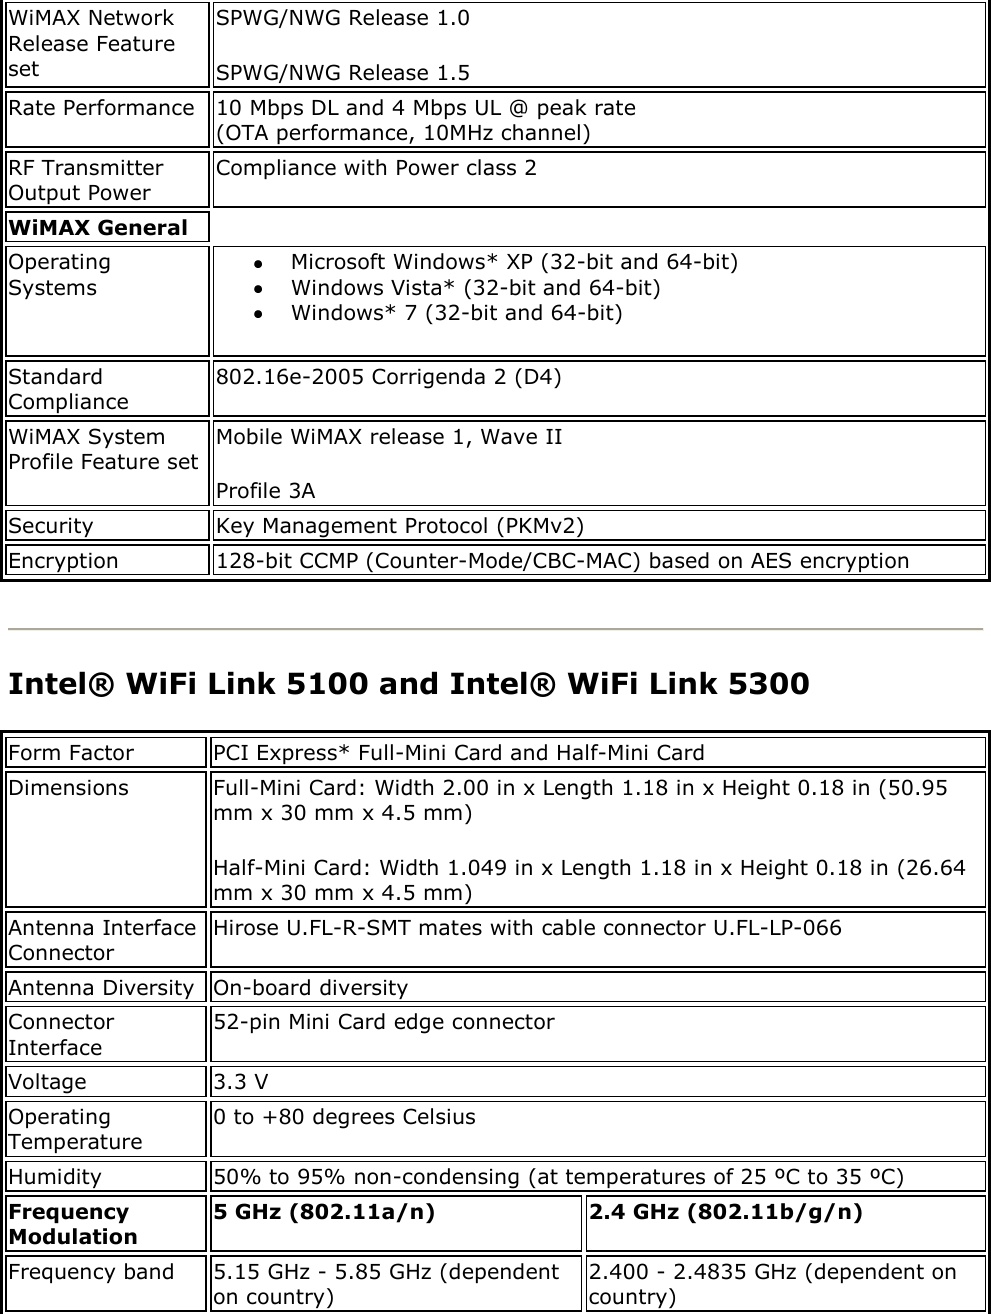 WiMAX Network Release Feature set SPWG/NWG Release 1.0 SPWG/NWG Release 1.5 Rate Performance 10 Mbps DL and 4 Mbps UL @ peak rate (OTA performance, 10MHz channel) RF Transmitter Output Power Compliance with Power class 2 WiMAX General    Operating Systems  Microsoft Windows* XP (32-bit and 64-bit)   Windows Vista* (32-bit and 64-bit)   Windows* 7 (32-bit and 64-bit) Standard Compliance 802.16e-2005 Corrigenda 2 (D4) WiMAX System Profile Feature set Mobile WiMAX release 1, Wave II  Profile 3A Security Key Management Protocol (PKMv2) Encryption 128-bit CCMP (Counter-Mode/CBC-MAC) based on AES encryption  Intel® WiFi Link 5100 and Intel® WiFi Link 5300 Form Factor PCI Express* Full-Mini Card and Half-Mini Card  Dimensions Full-Mini Card: Width 2.00 in x Length 1.18 in x Height 0.18 in (50.95 mm x 30 mm x 4.5 mm) Half-Mini Card: Width 1.049 in x Length 1.18 in x Height 0.18 in (26.64 mm x 30 mm x 4.5 mm) Antenna Interface Connector Hirose U.FL-R-SMT mates with cable connector U.FL-LP-066 Antenna Diversity On-board diversity Connector Interface 52-pin Mini Card edge connector Voltage 3.3 V Operating Temperature 0 to +80 degrees Celsius Humidity 50% to 95% non-condensing (at temperatures of 25 ºC to 35 ºC) Frequency Modulation 5 GHz (802.11a/n) 2.4 GHz (802.11b/g/n) Frequency band 5.15 GHz - 5.85 GHz (dependent on country) 2.400 - 2.4835 GHz (dependent on country) 